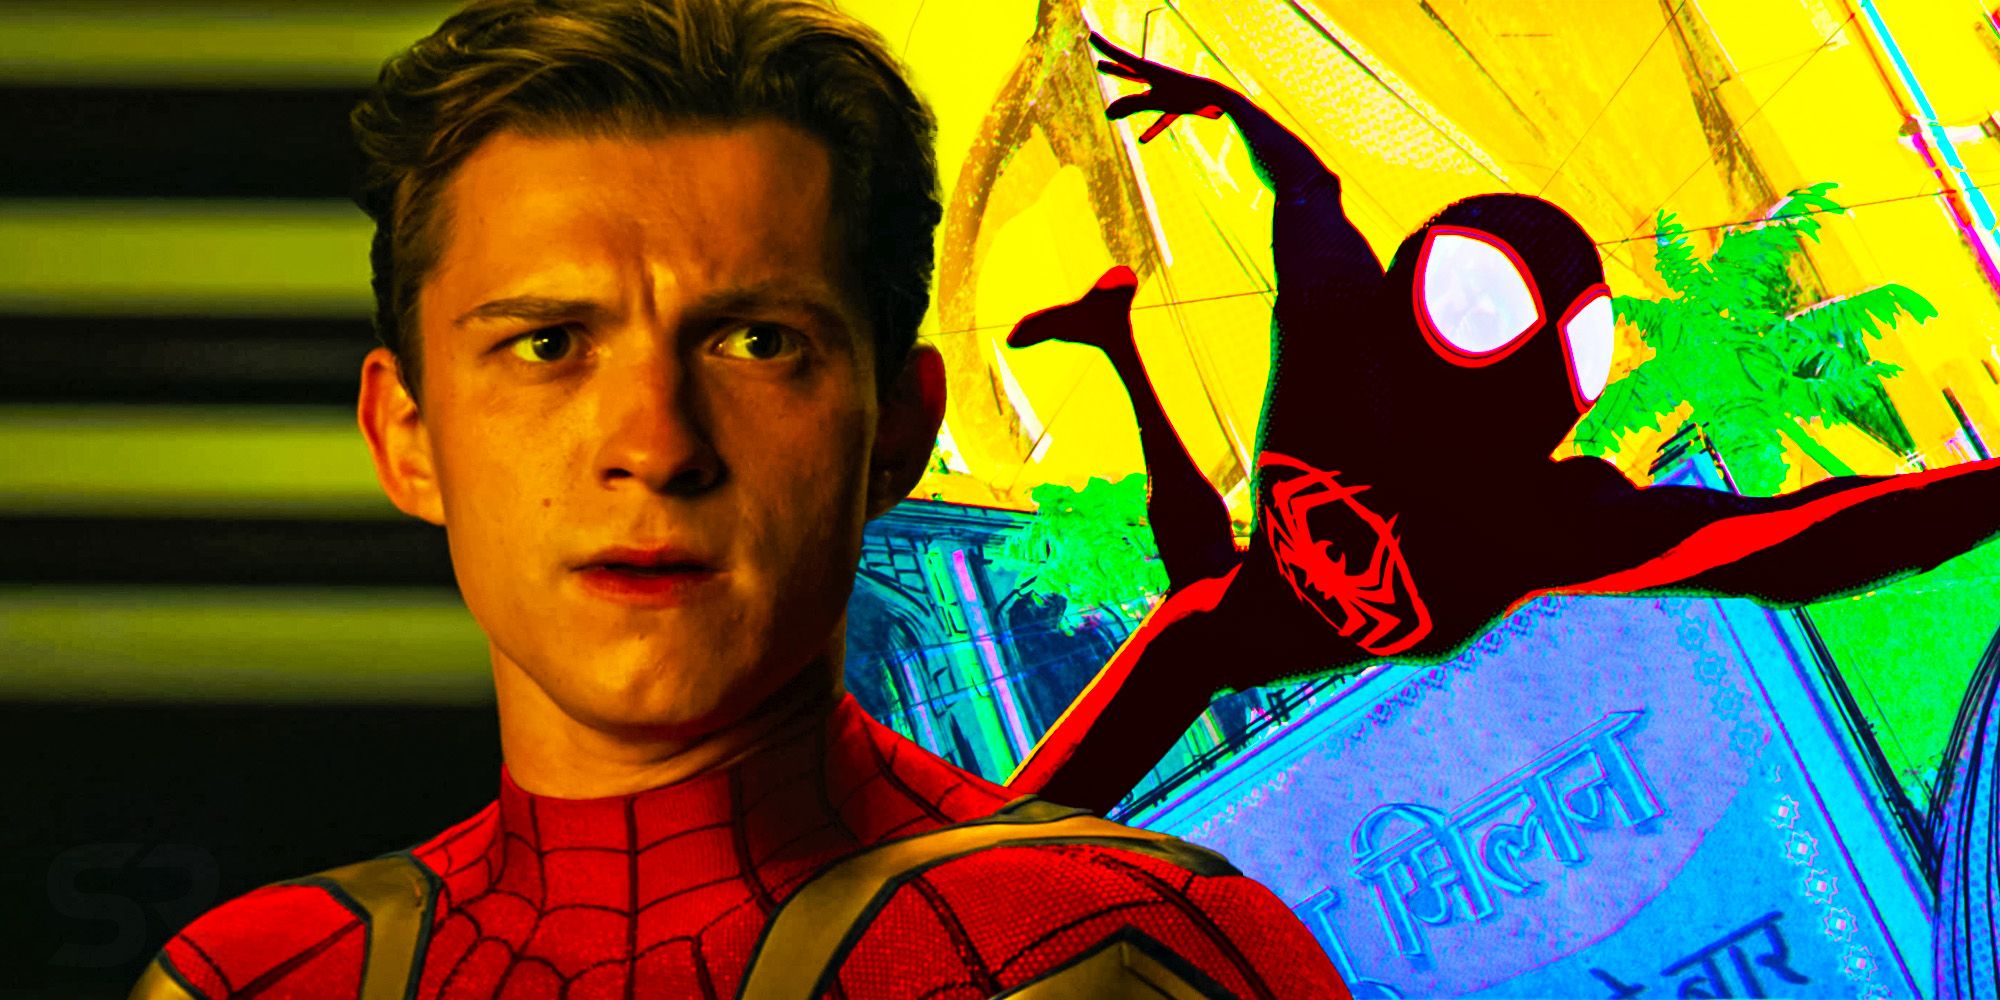 Custom image of Tom Holland and Miles Morales from the Spiderverse movies